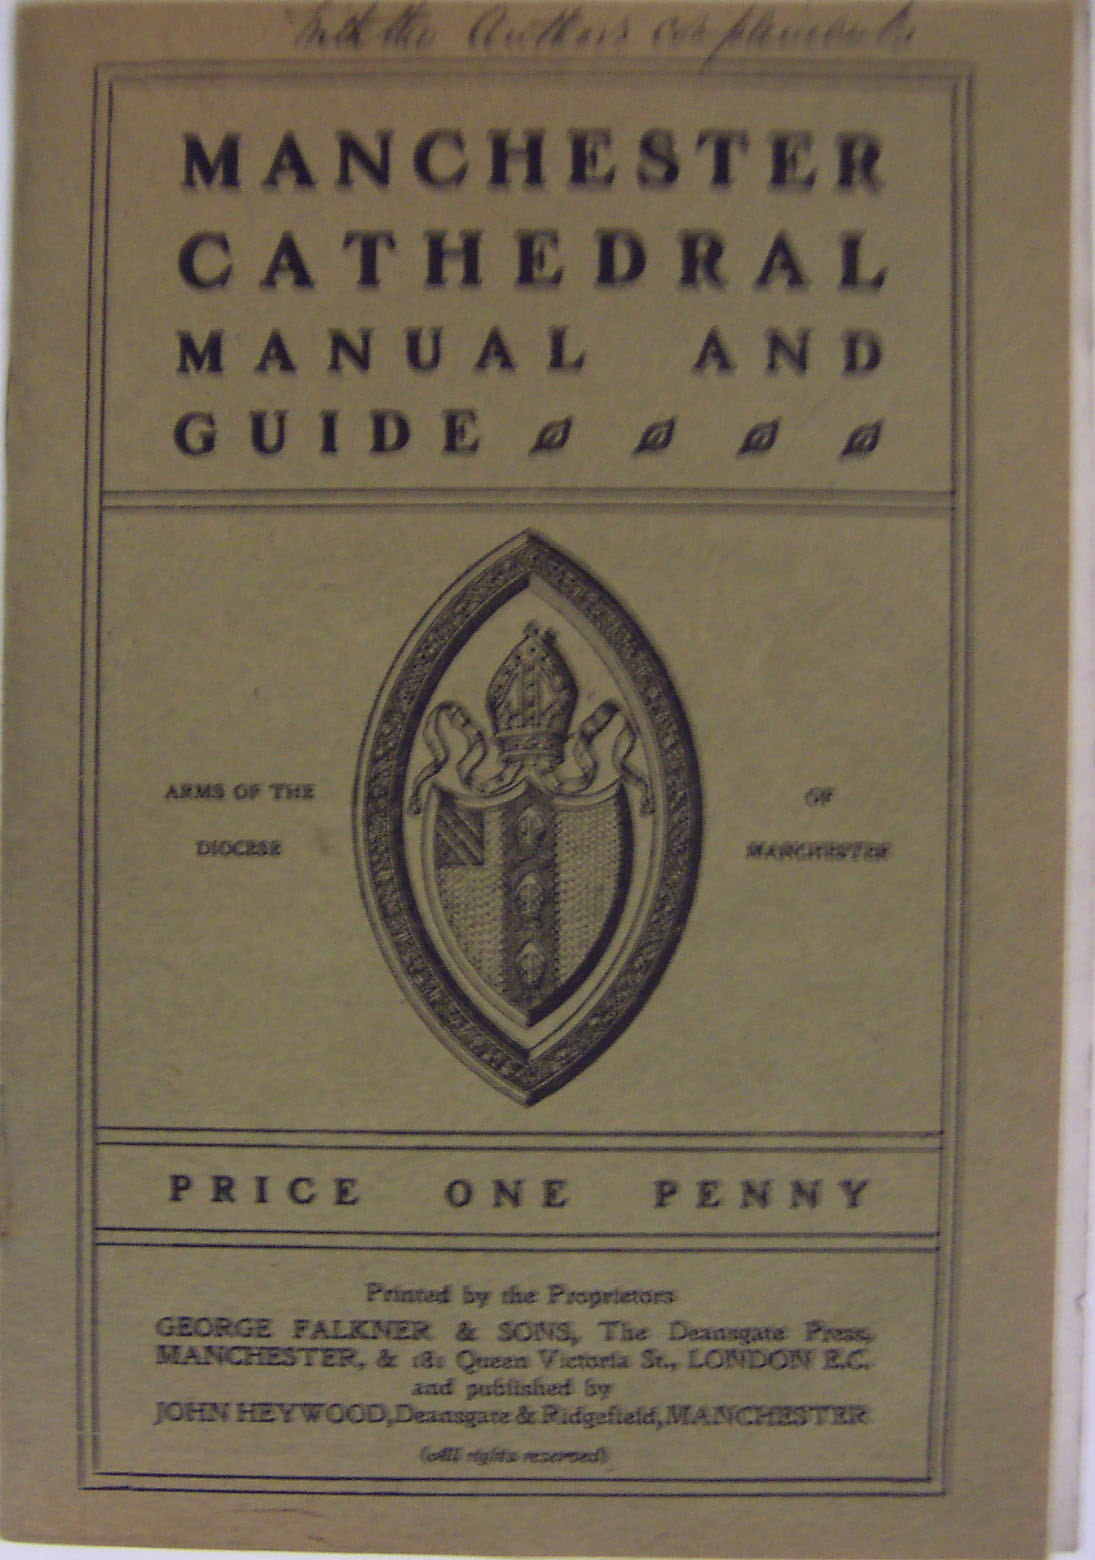 Manchester Cathedral Manual and Guide.